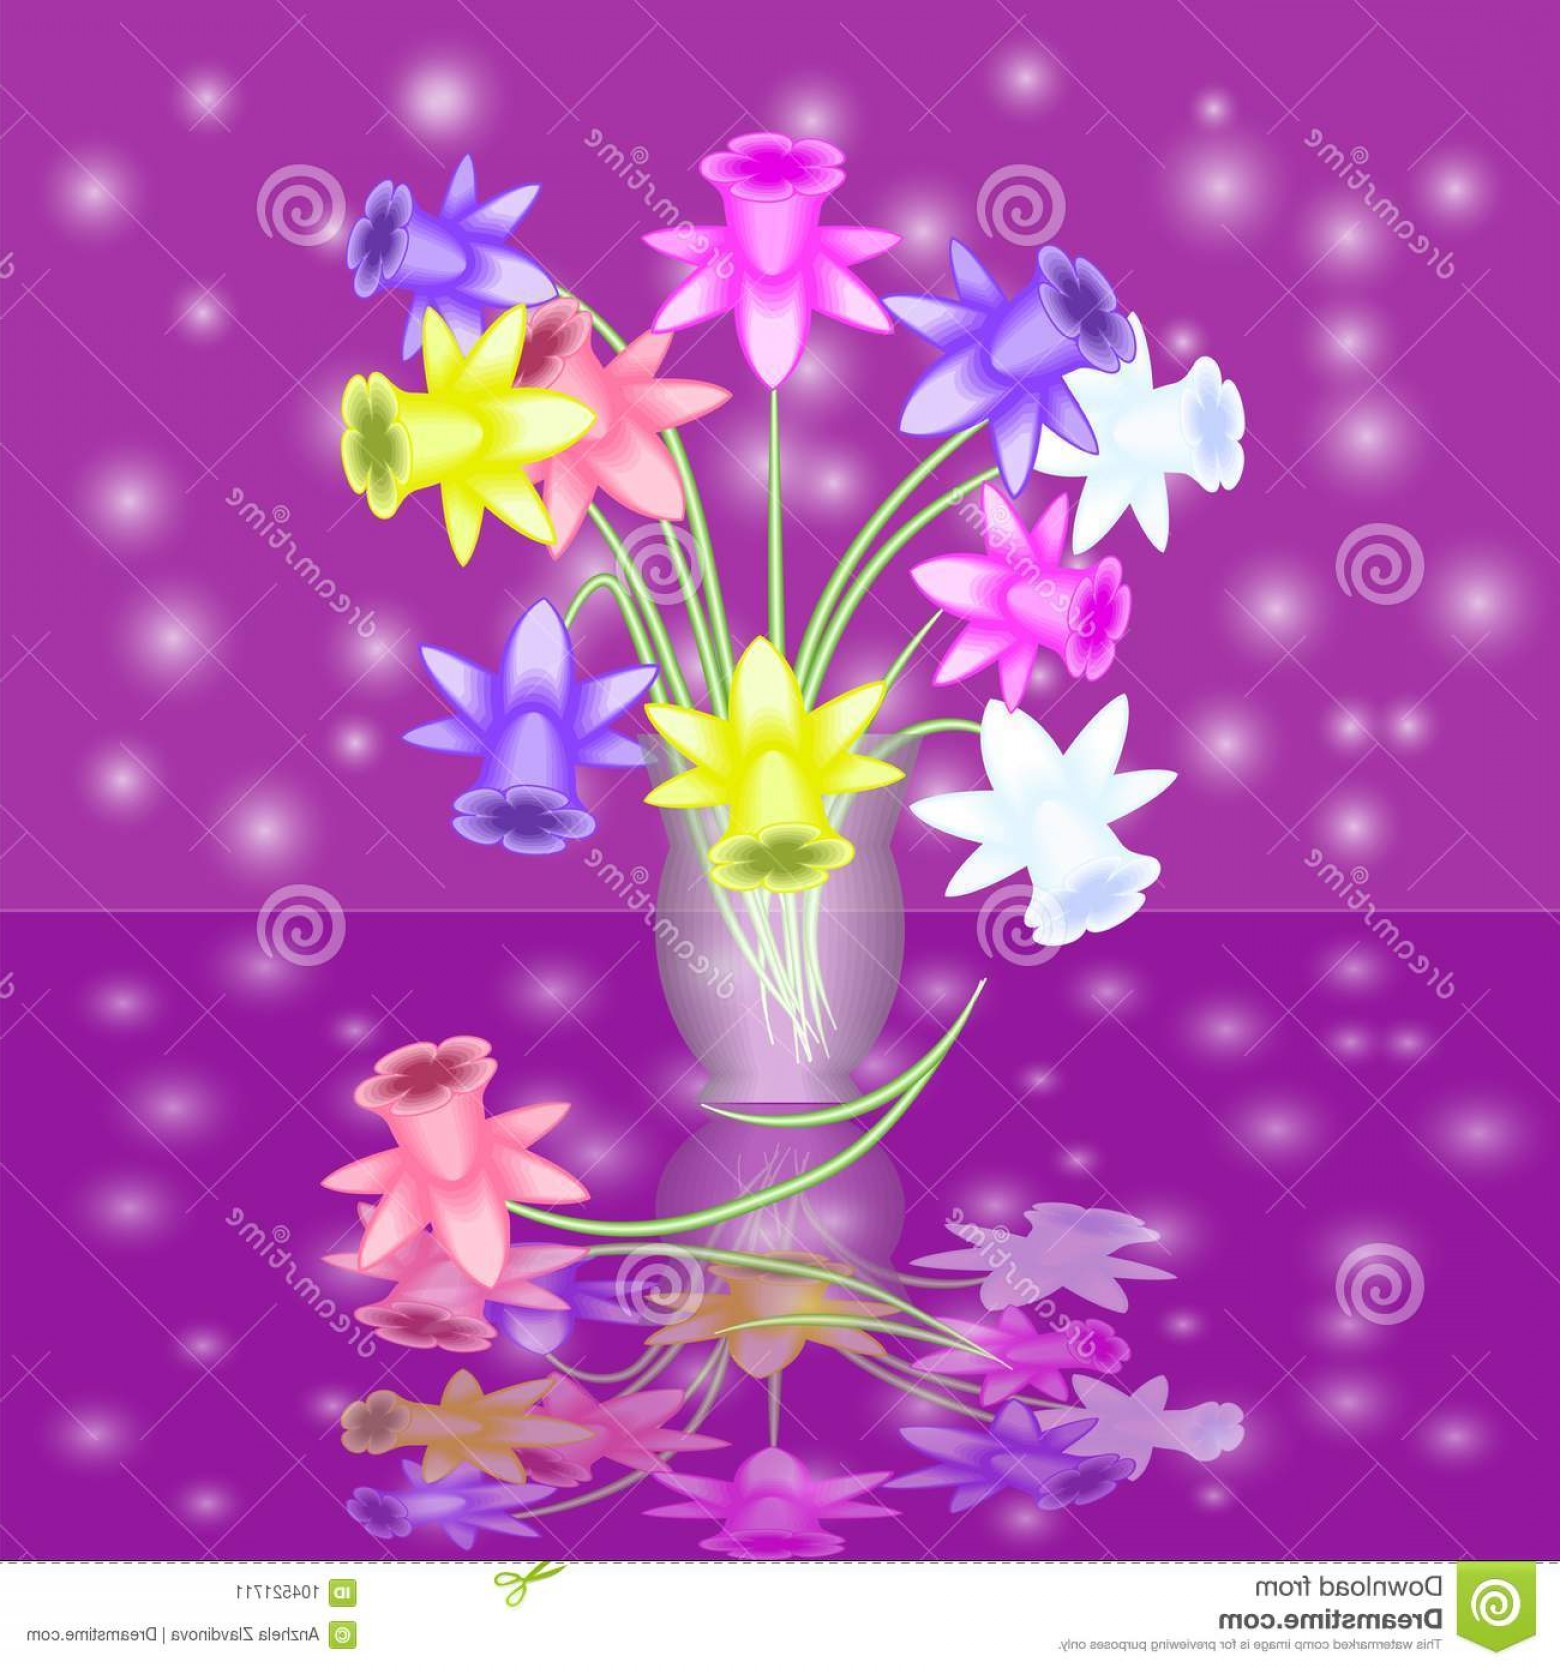 vase clipart abstract flower